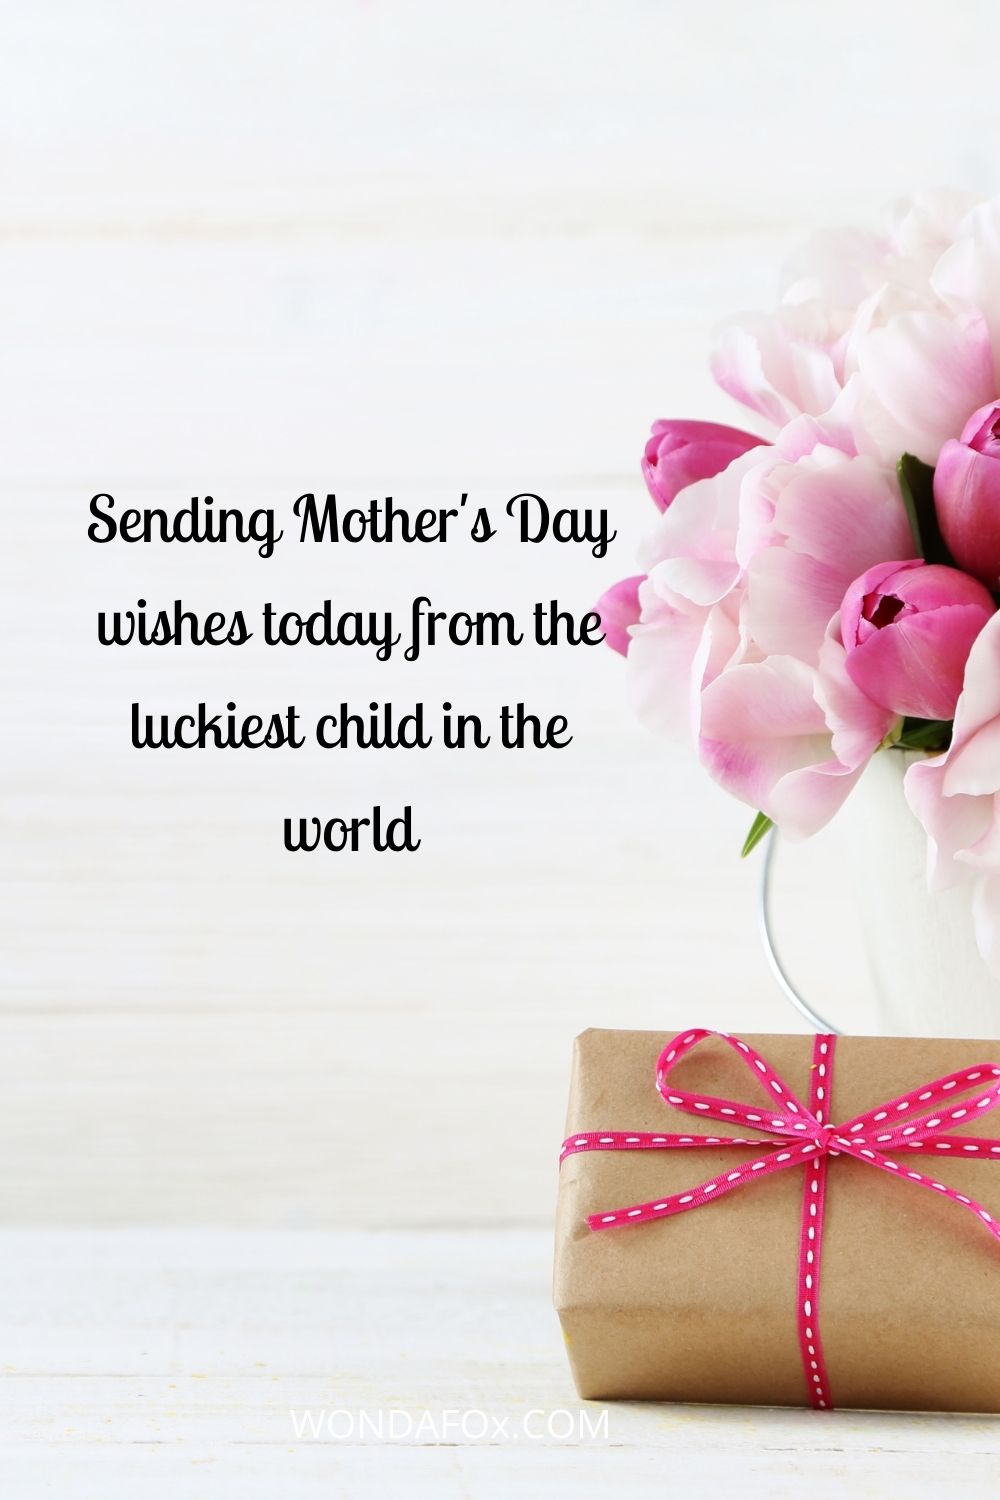 Sending Mother's Day wishes today from the luckiest child in the world Mothers day wishes